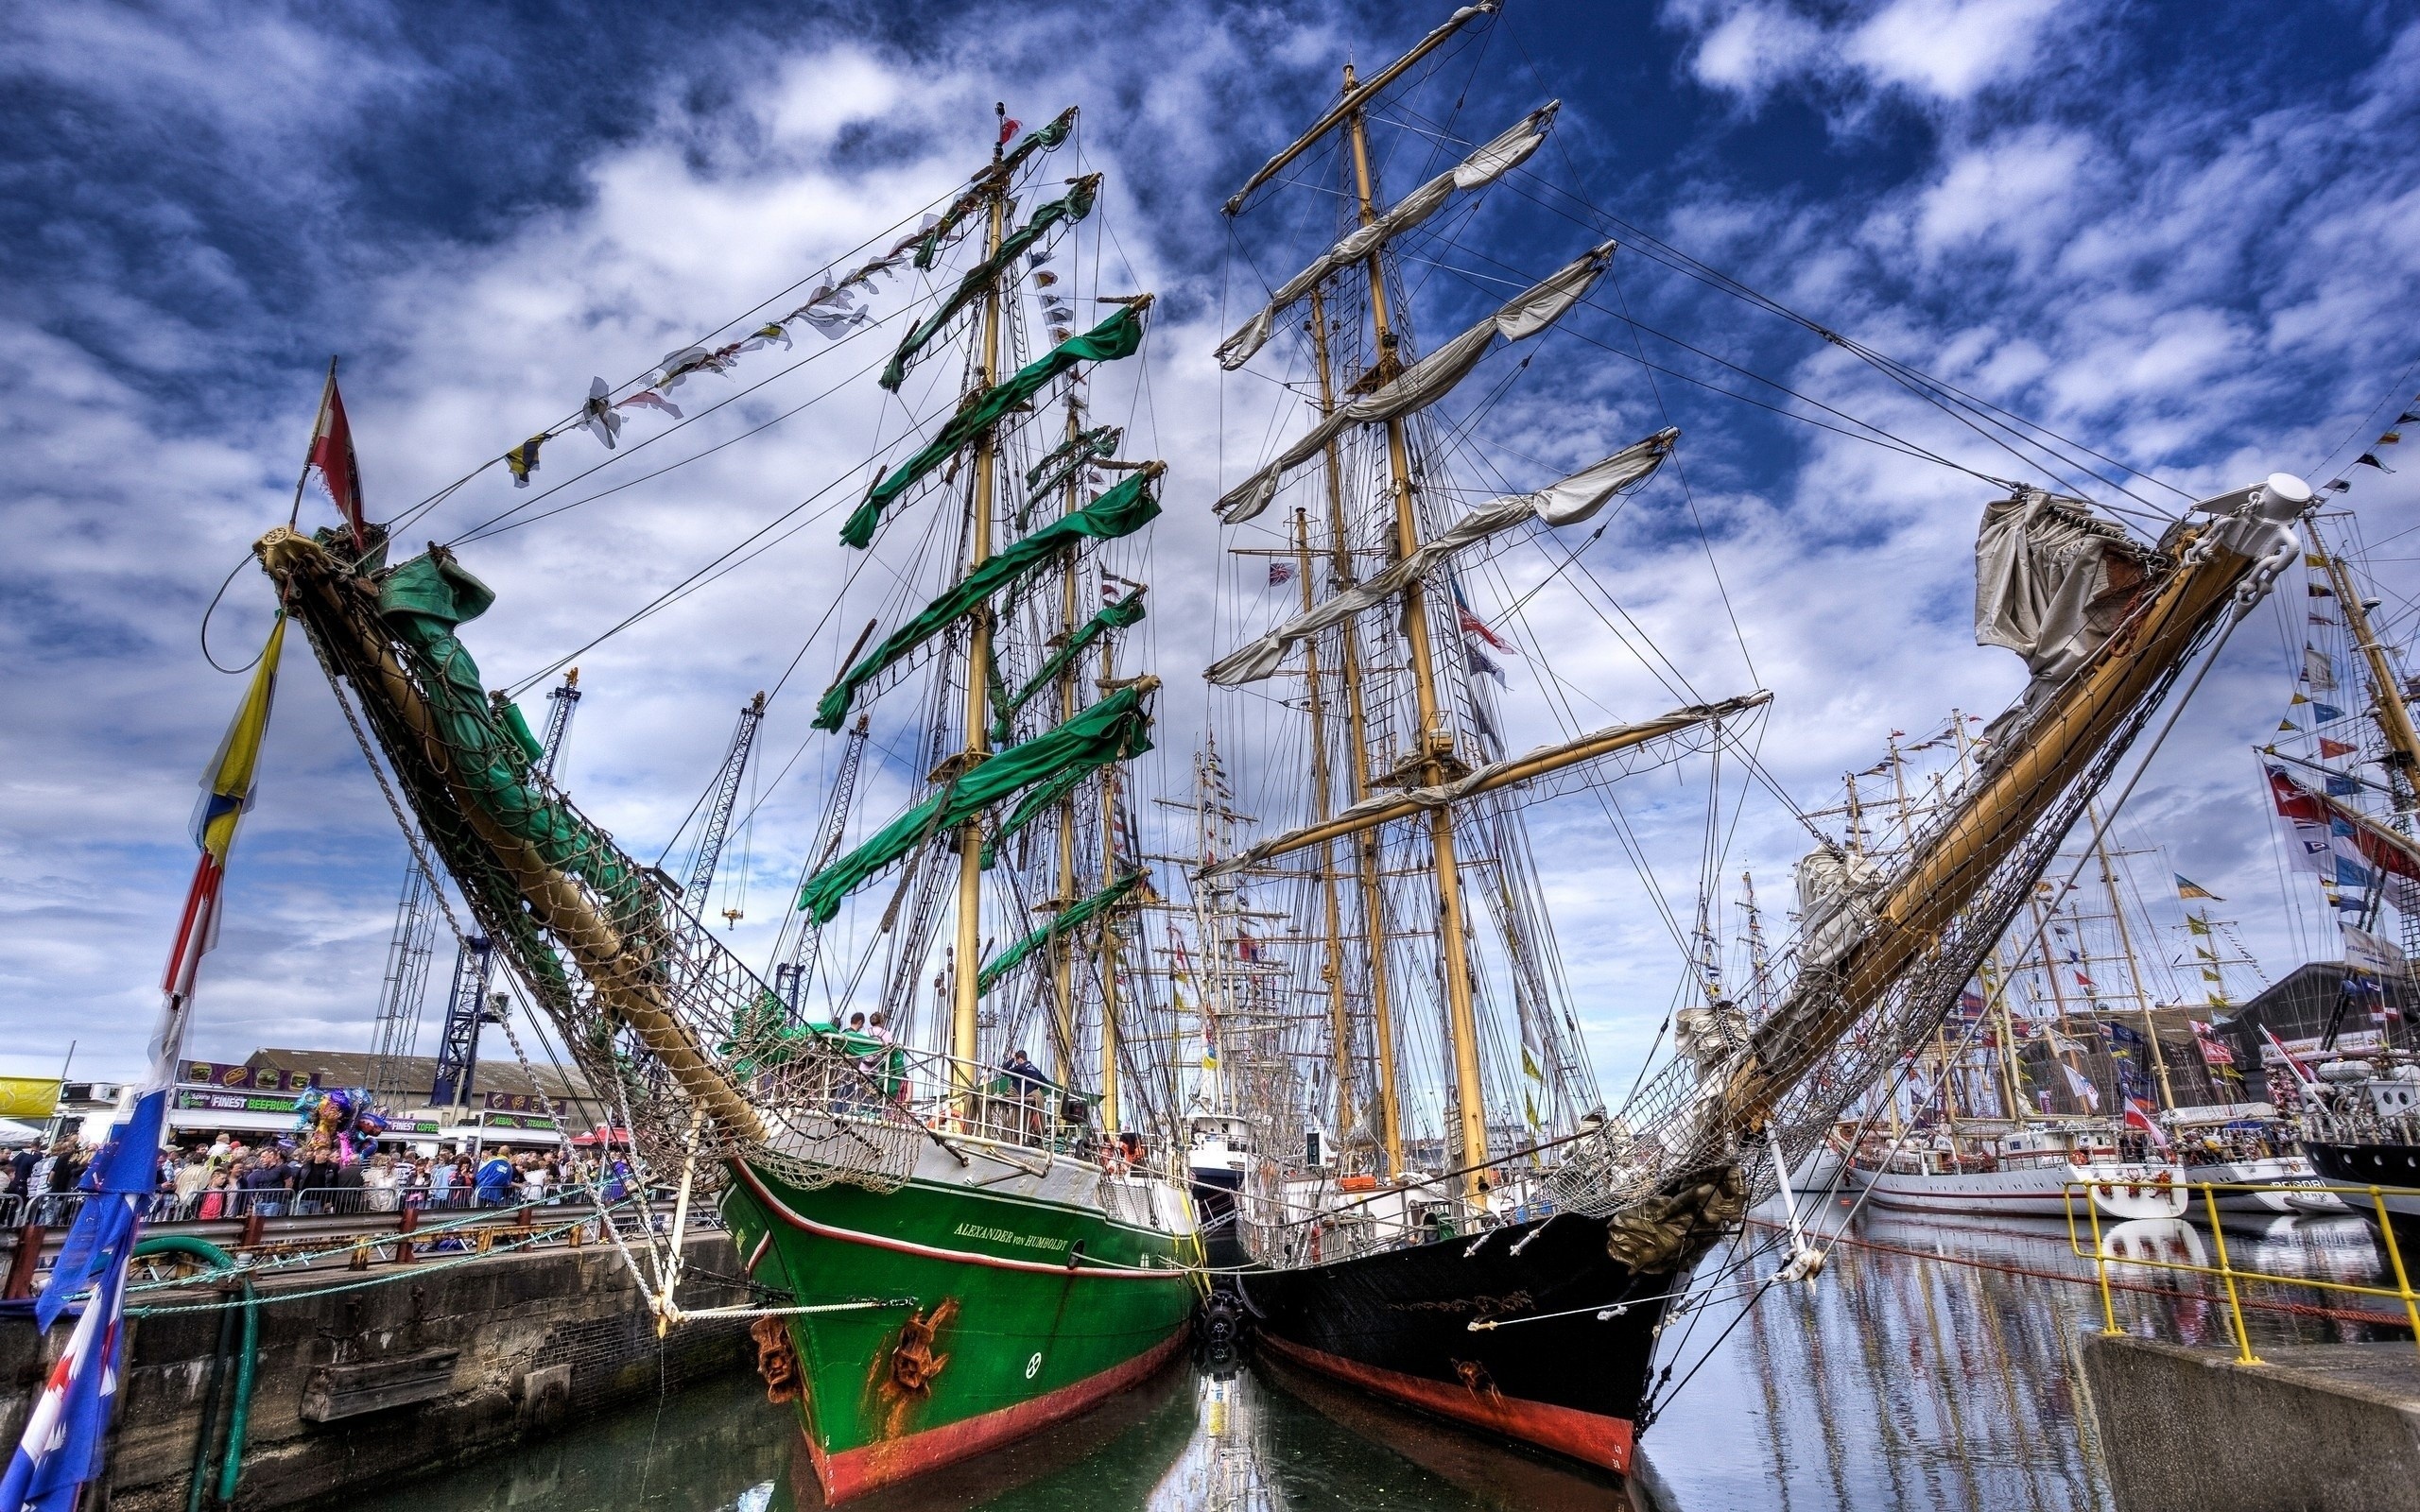 Windjammer: A barque, Ship with three or more masts, Harbor. 2560x1600 HD Wallpaper.